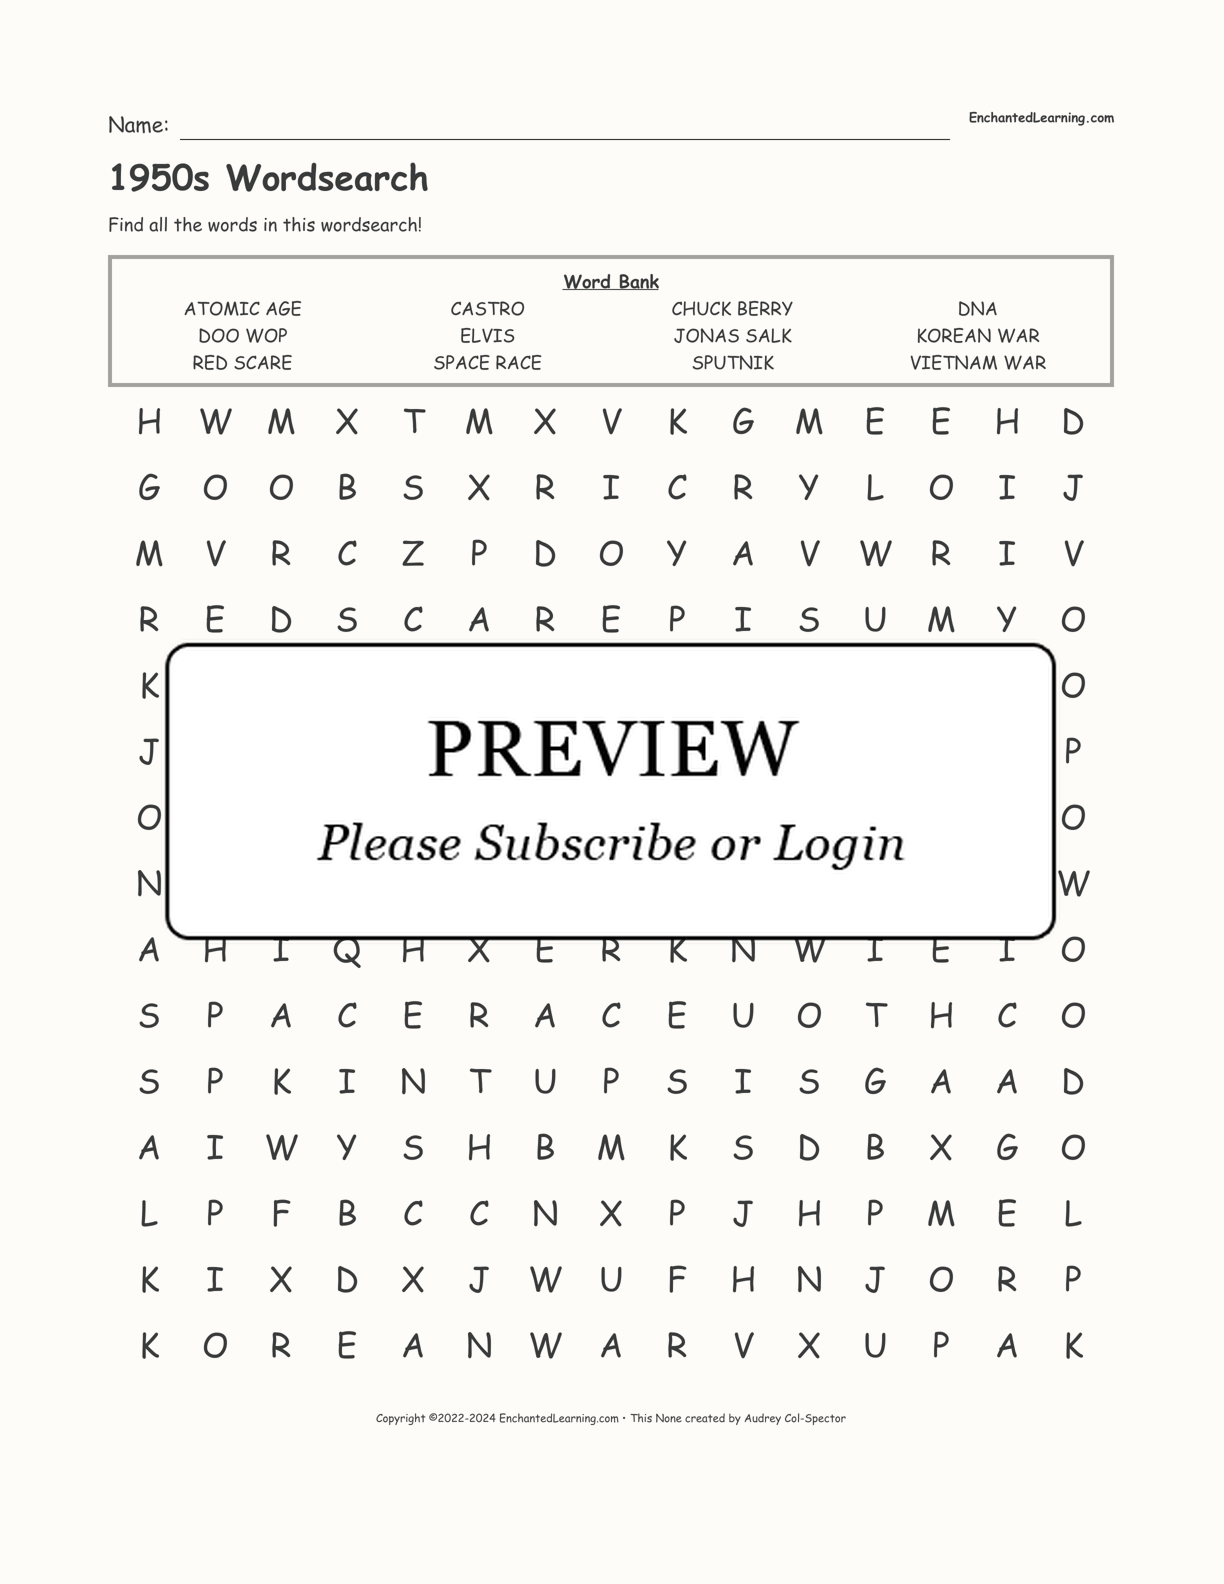 1950s Wordsearch interactive worksheet page 1